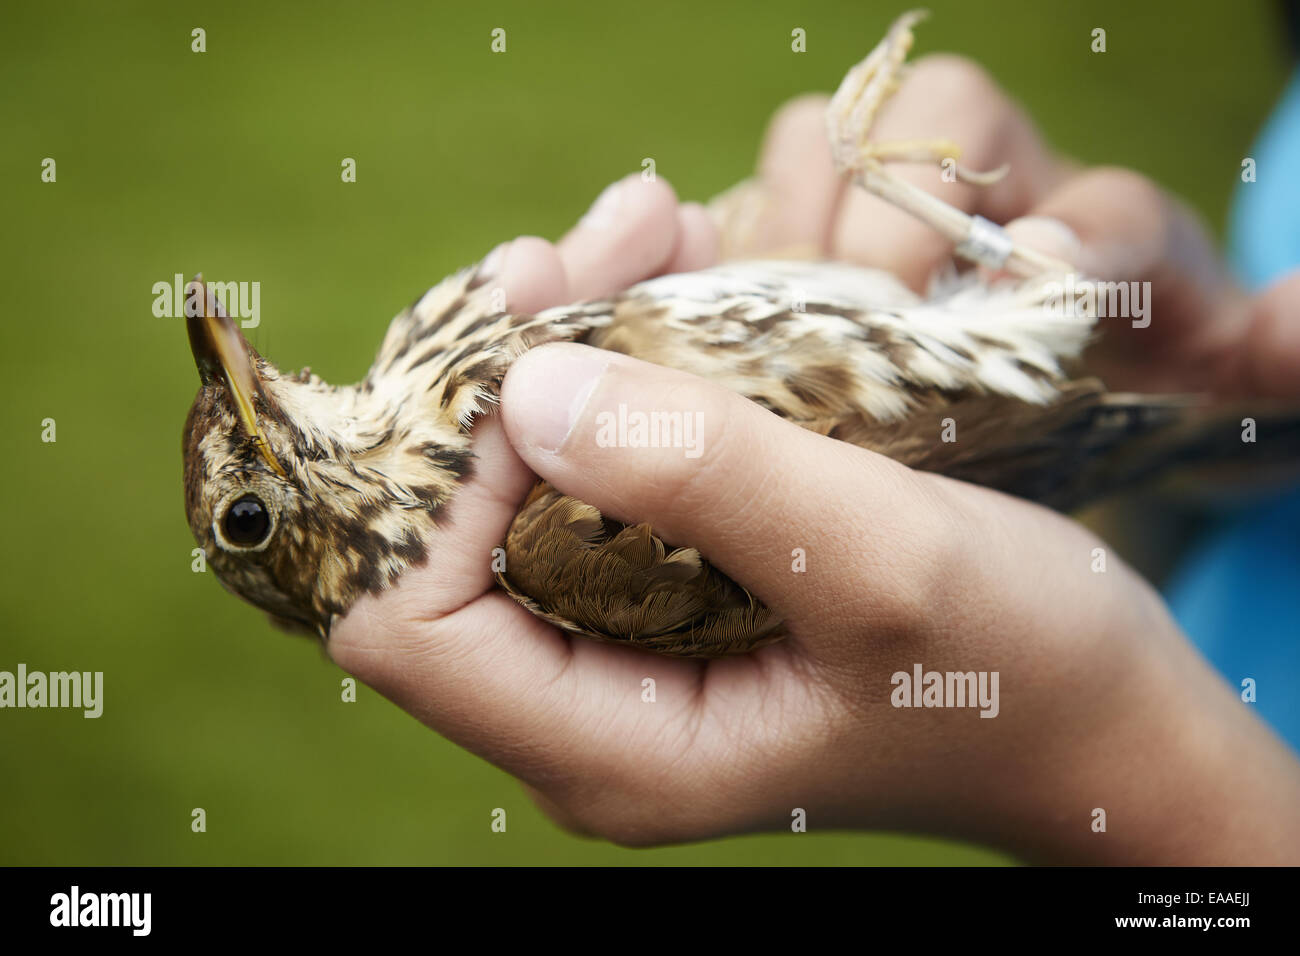 A girl holding a wild bird carefully in her hands. Stock Photo